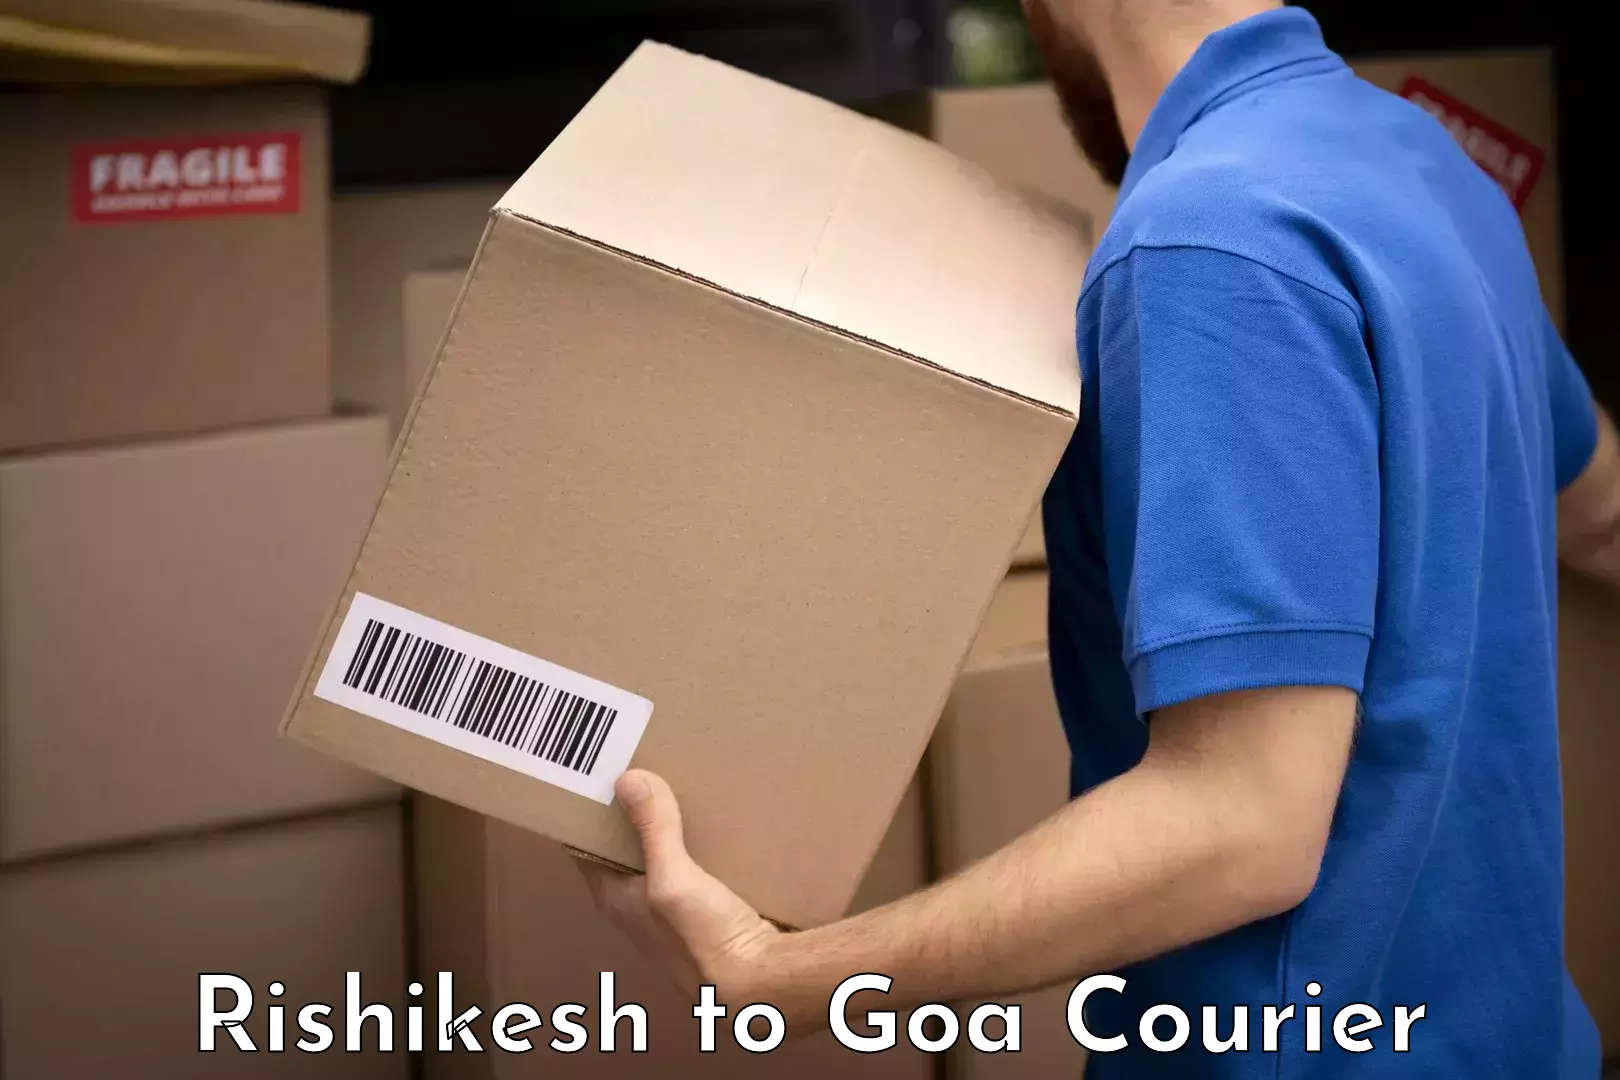 Luggage delivery system Rishikesh to Goa